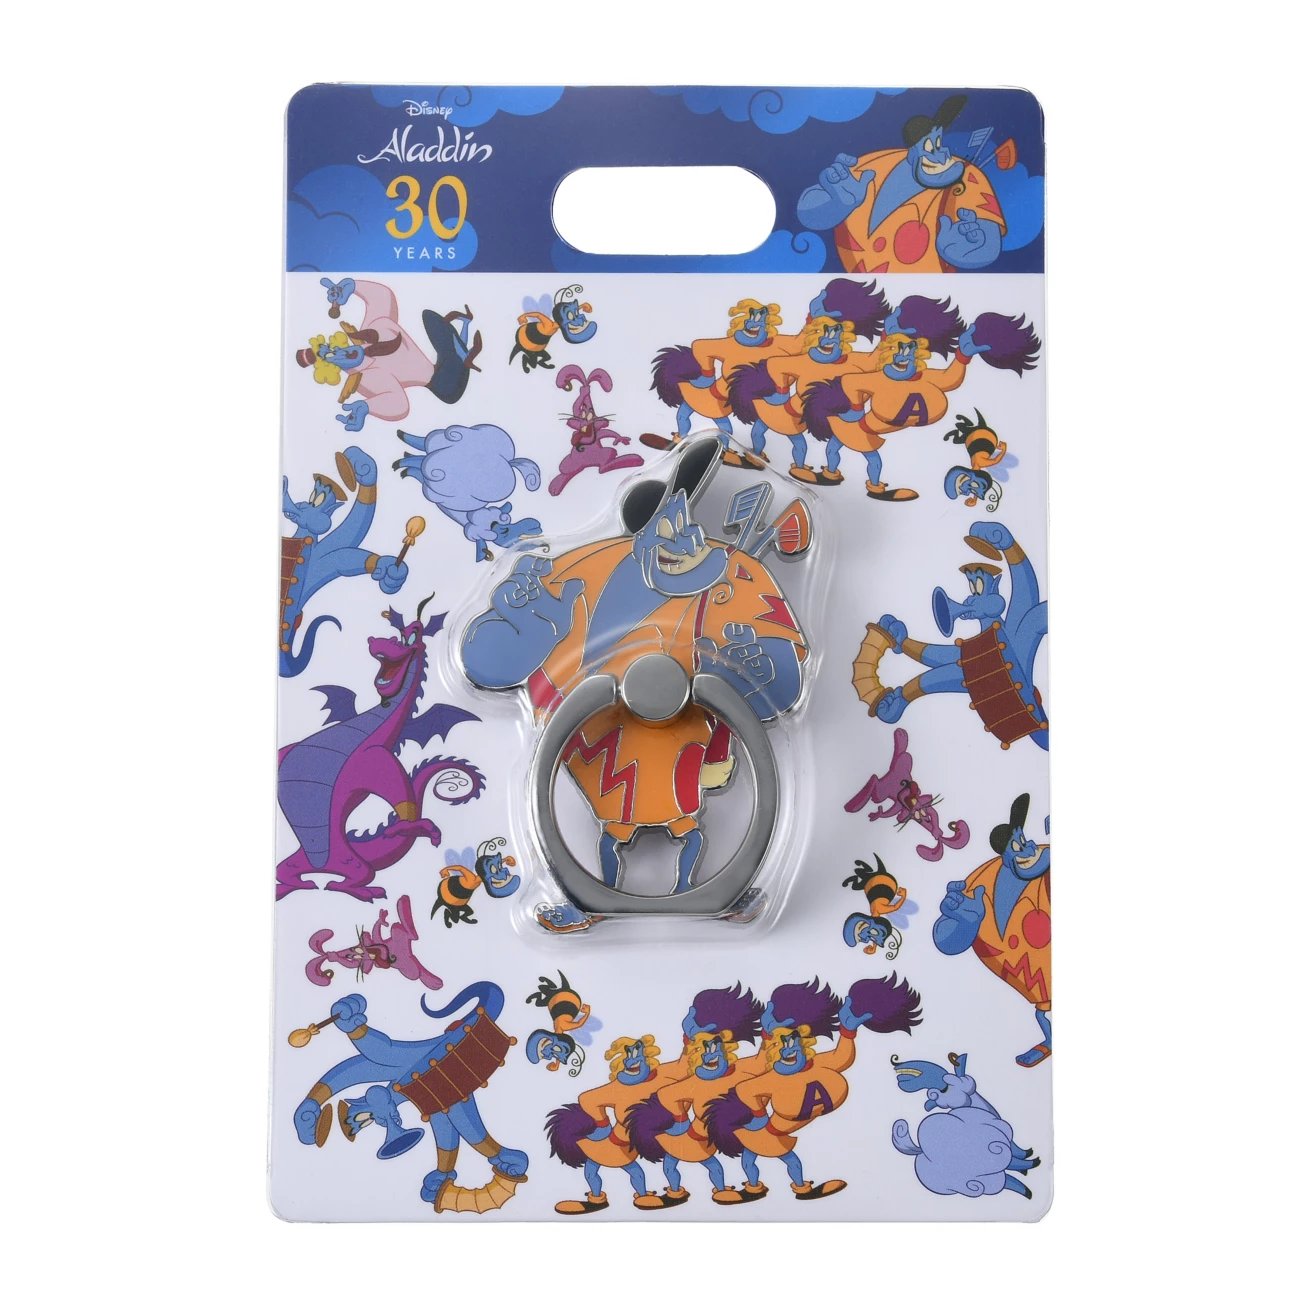 SDJ - Aladdin 30th Anniversary Collection - Cell phone ring